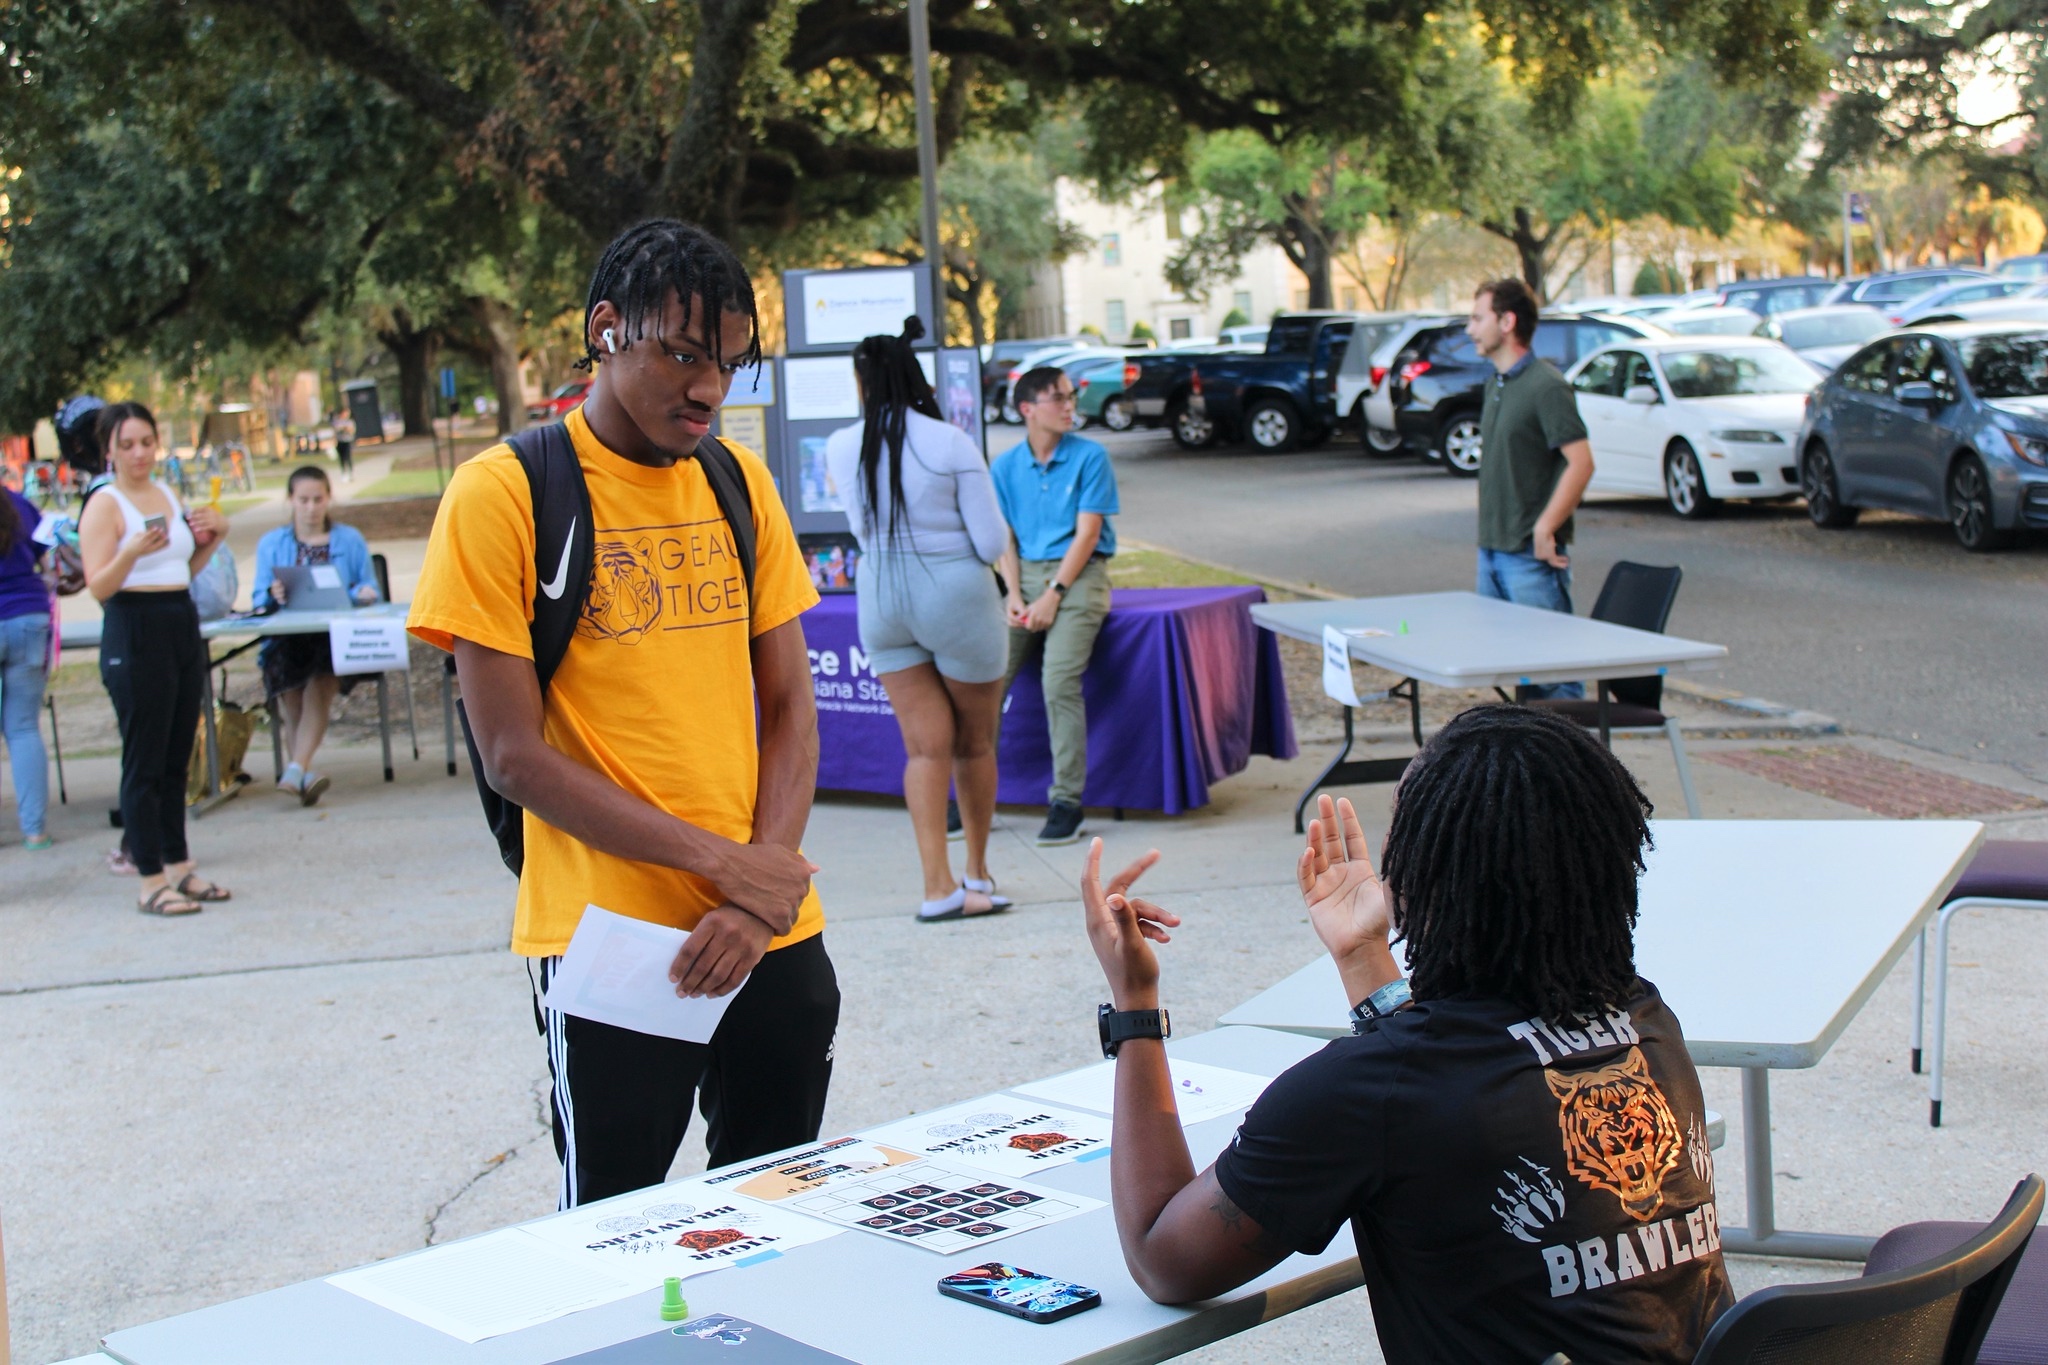 Student talking to a member of the Tiger Brawlers at an East Campus Apartments event.